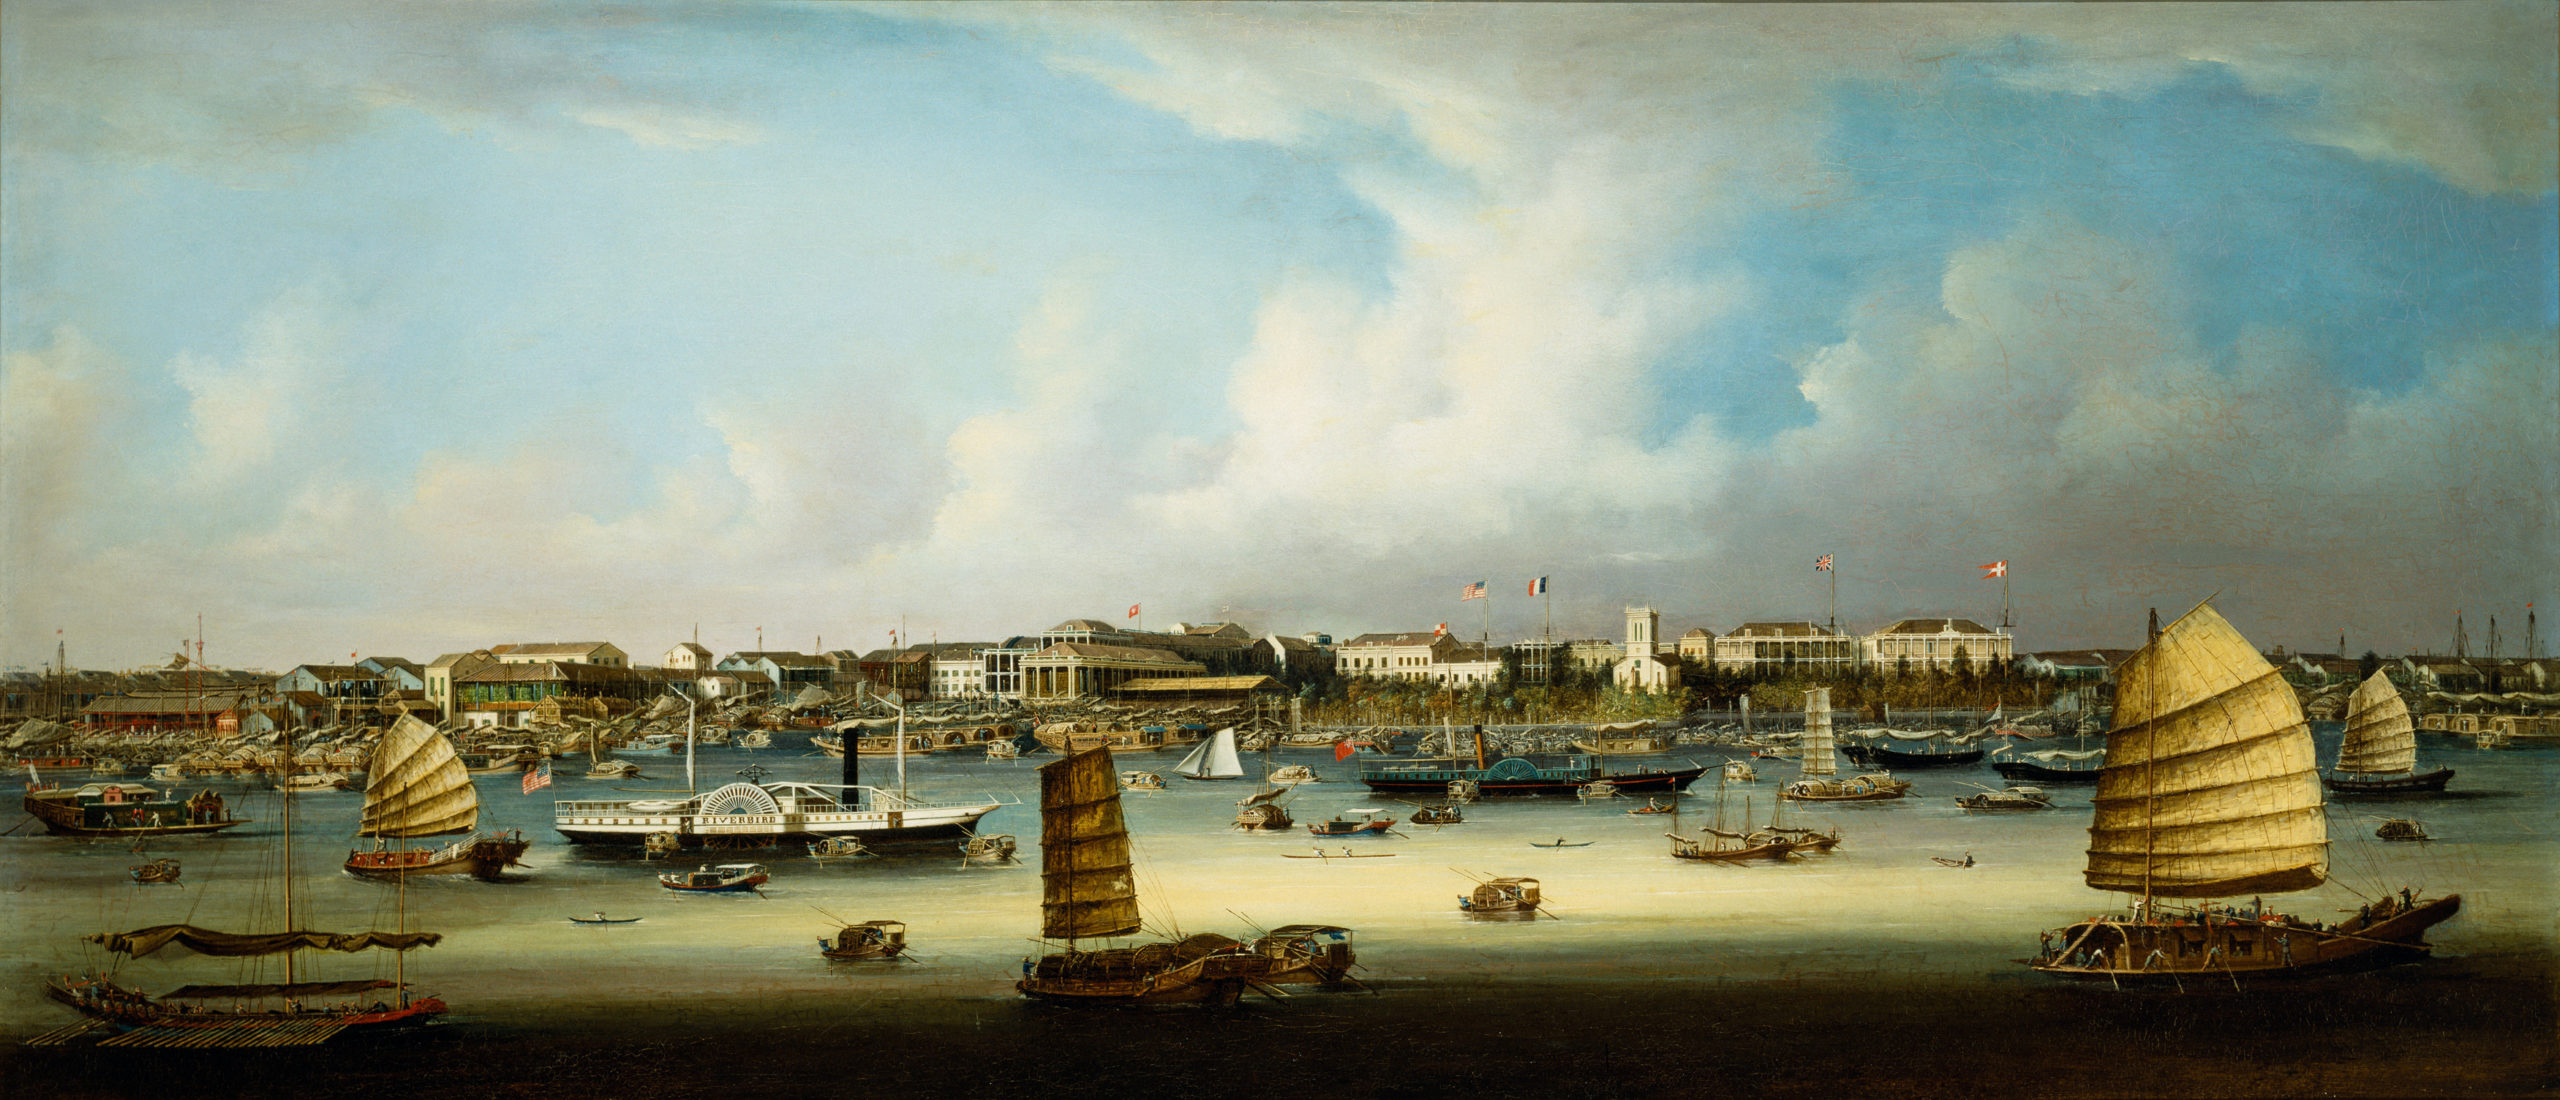 View of the foreign settlement in Guangzhou, 1855–60, Sunqua, oil on canvas, 80.8 x 184.5 cm (Peabody Essex Museum)